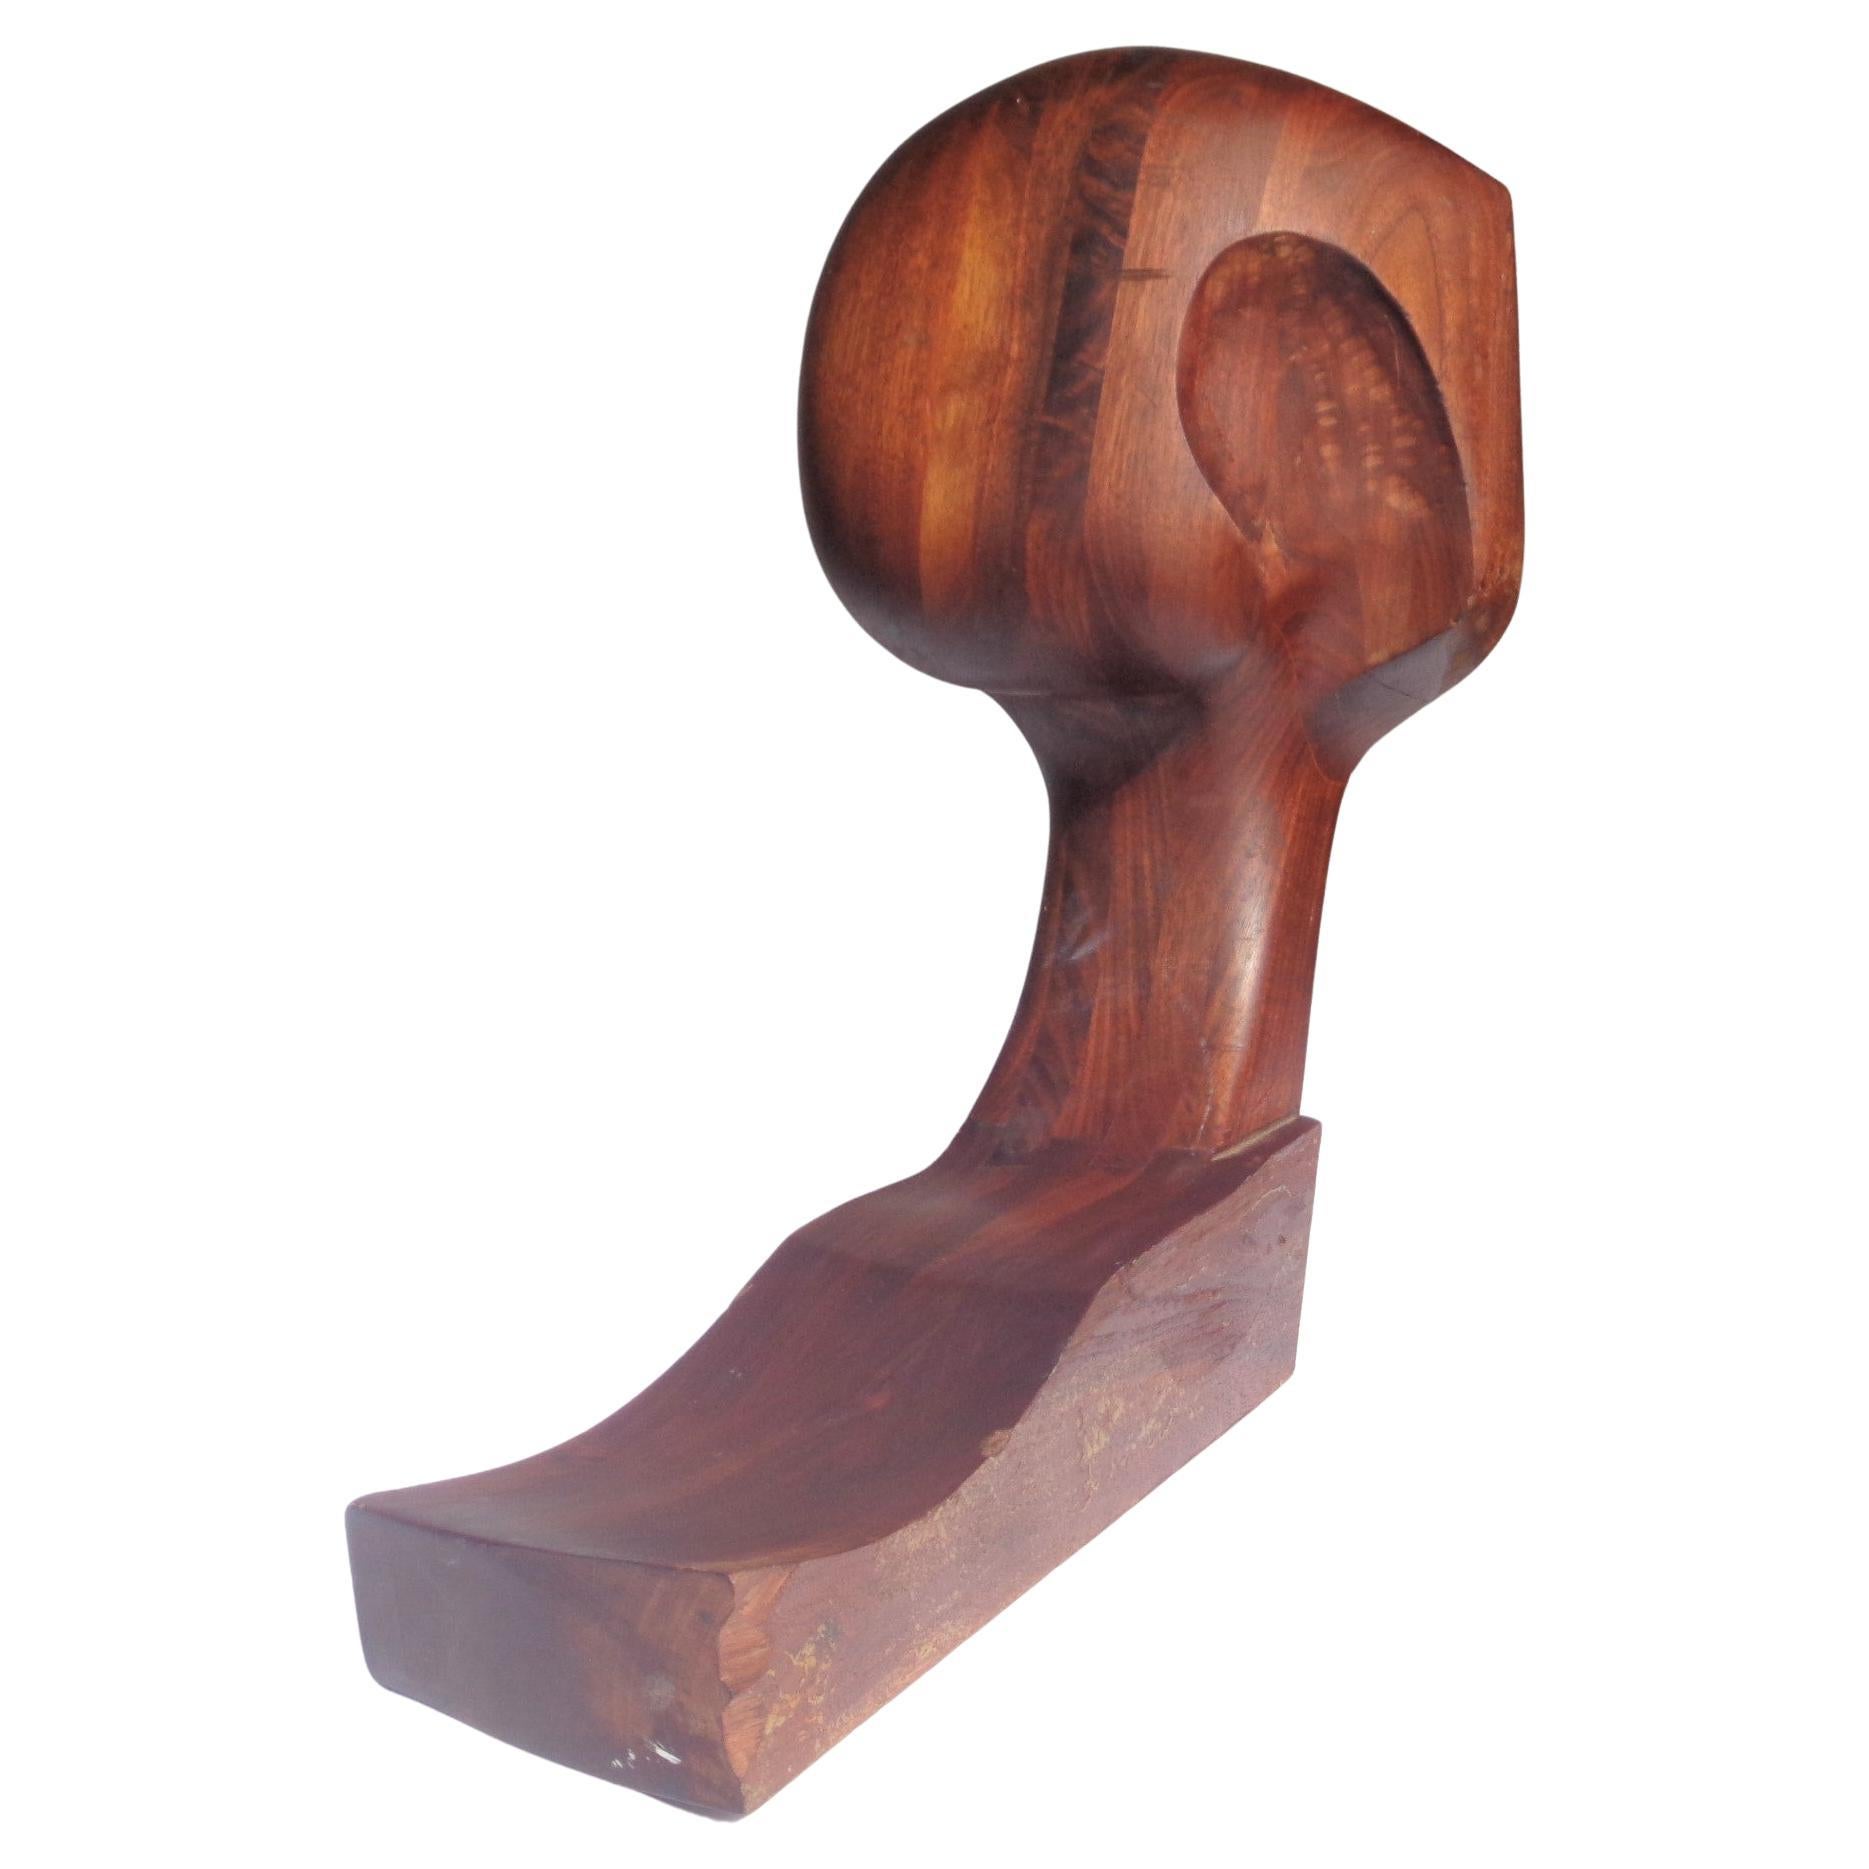 American Studio Craft Movement Abstract Sculpture Wood Bust, 1970-1980 For Sale